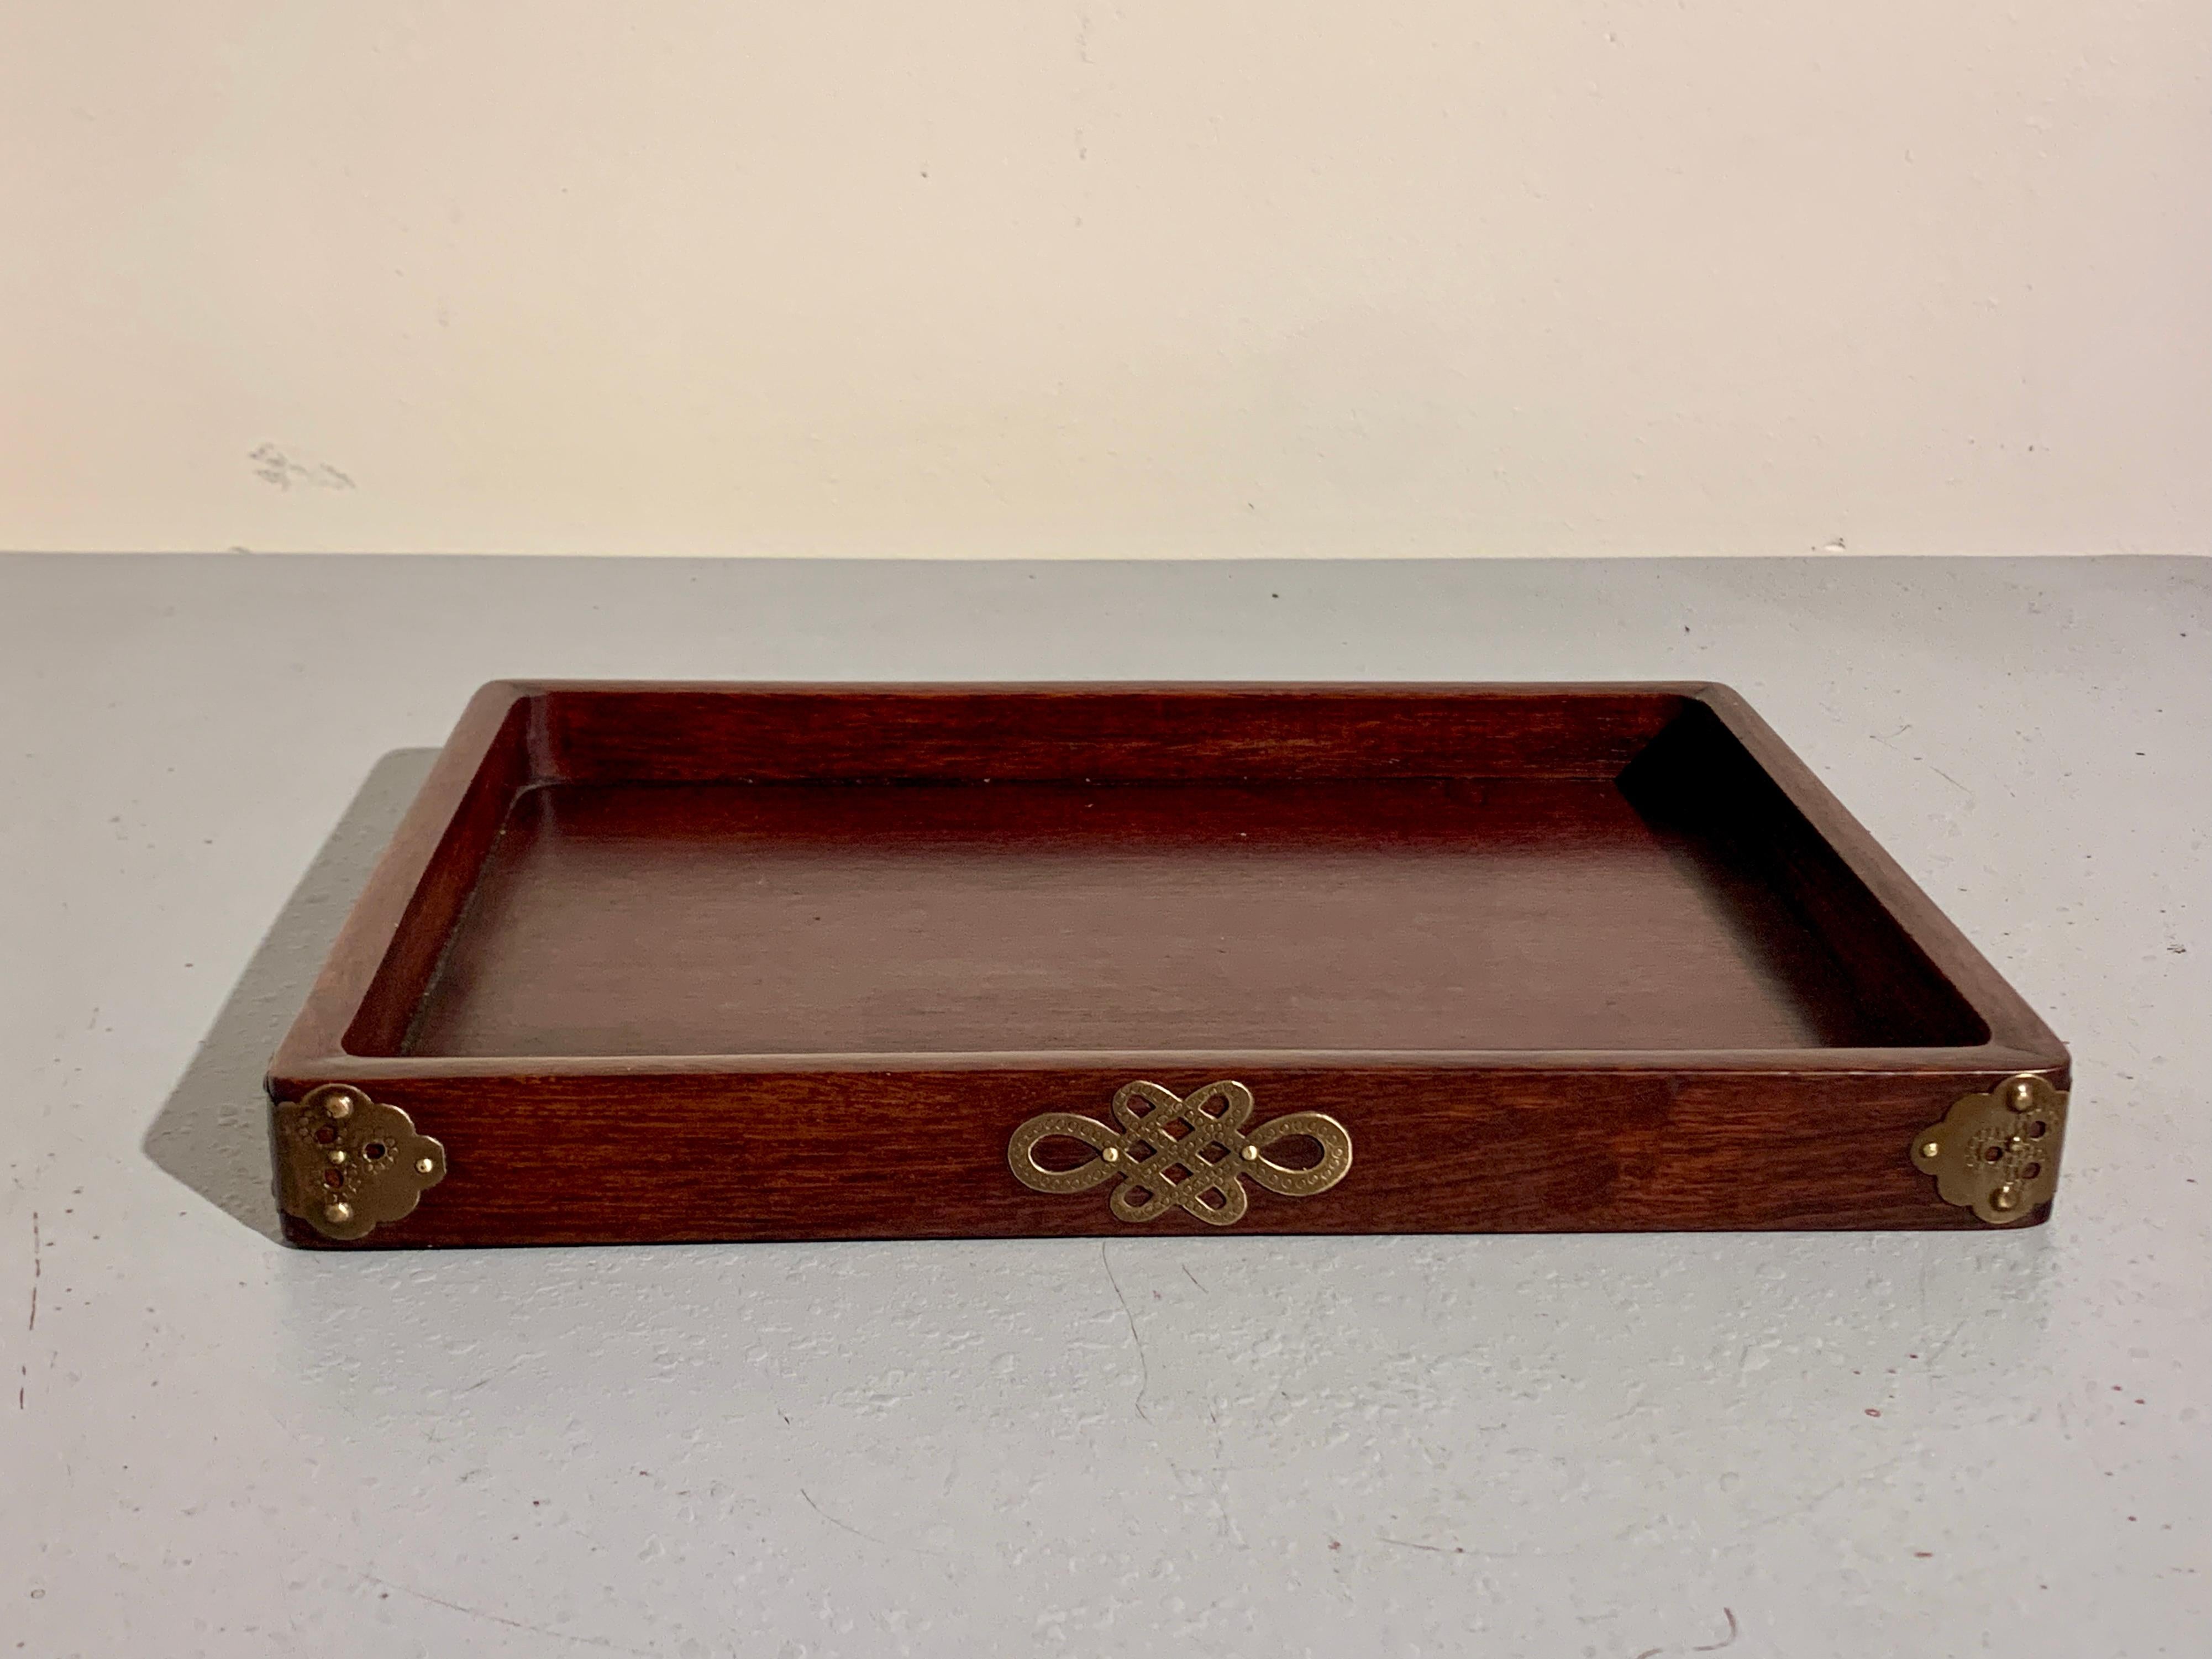 A simple and elegant Chinese hardwood and brass mounted scholar tray, late Qing Dynasty, circa 1900, China.

The scholar tray crafted of a solid and heavy densely figured hardwood of dark reddish brown color, and features an inset floating panel.